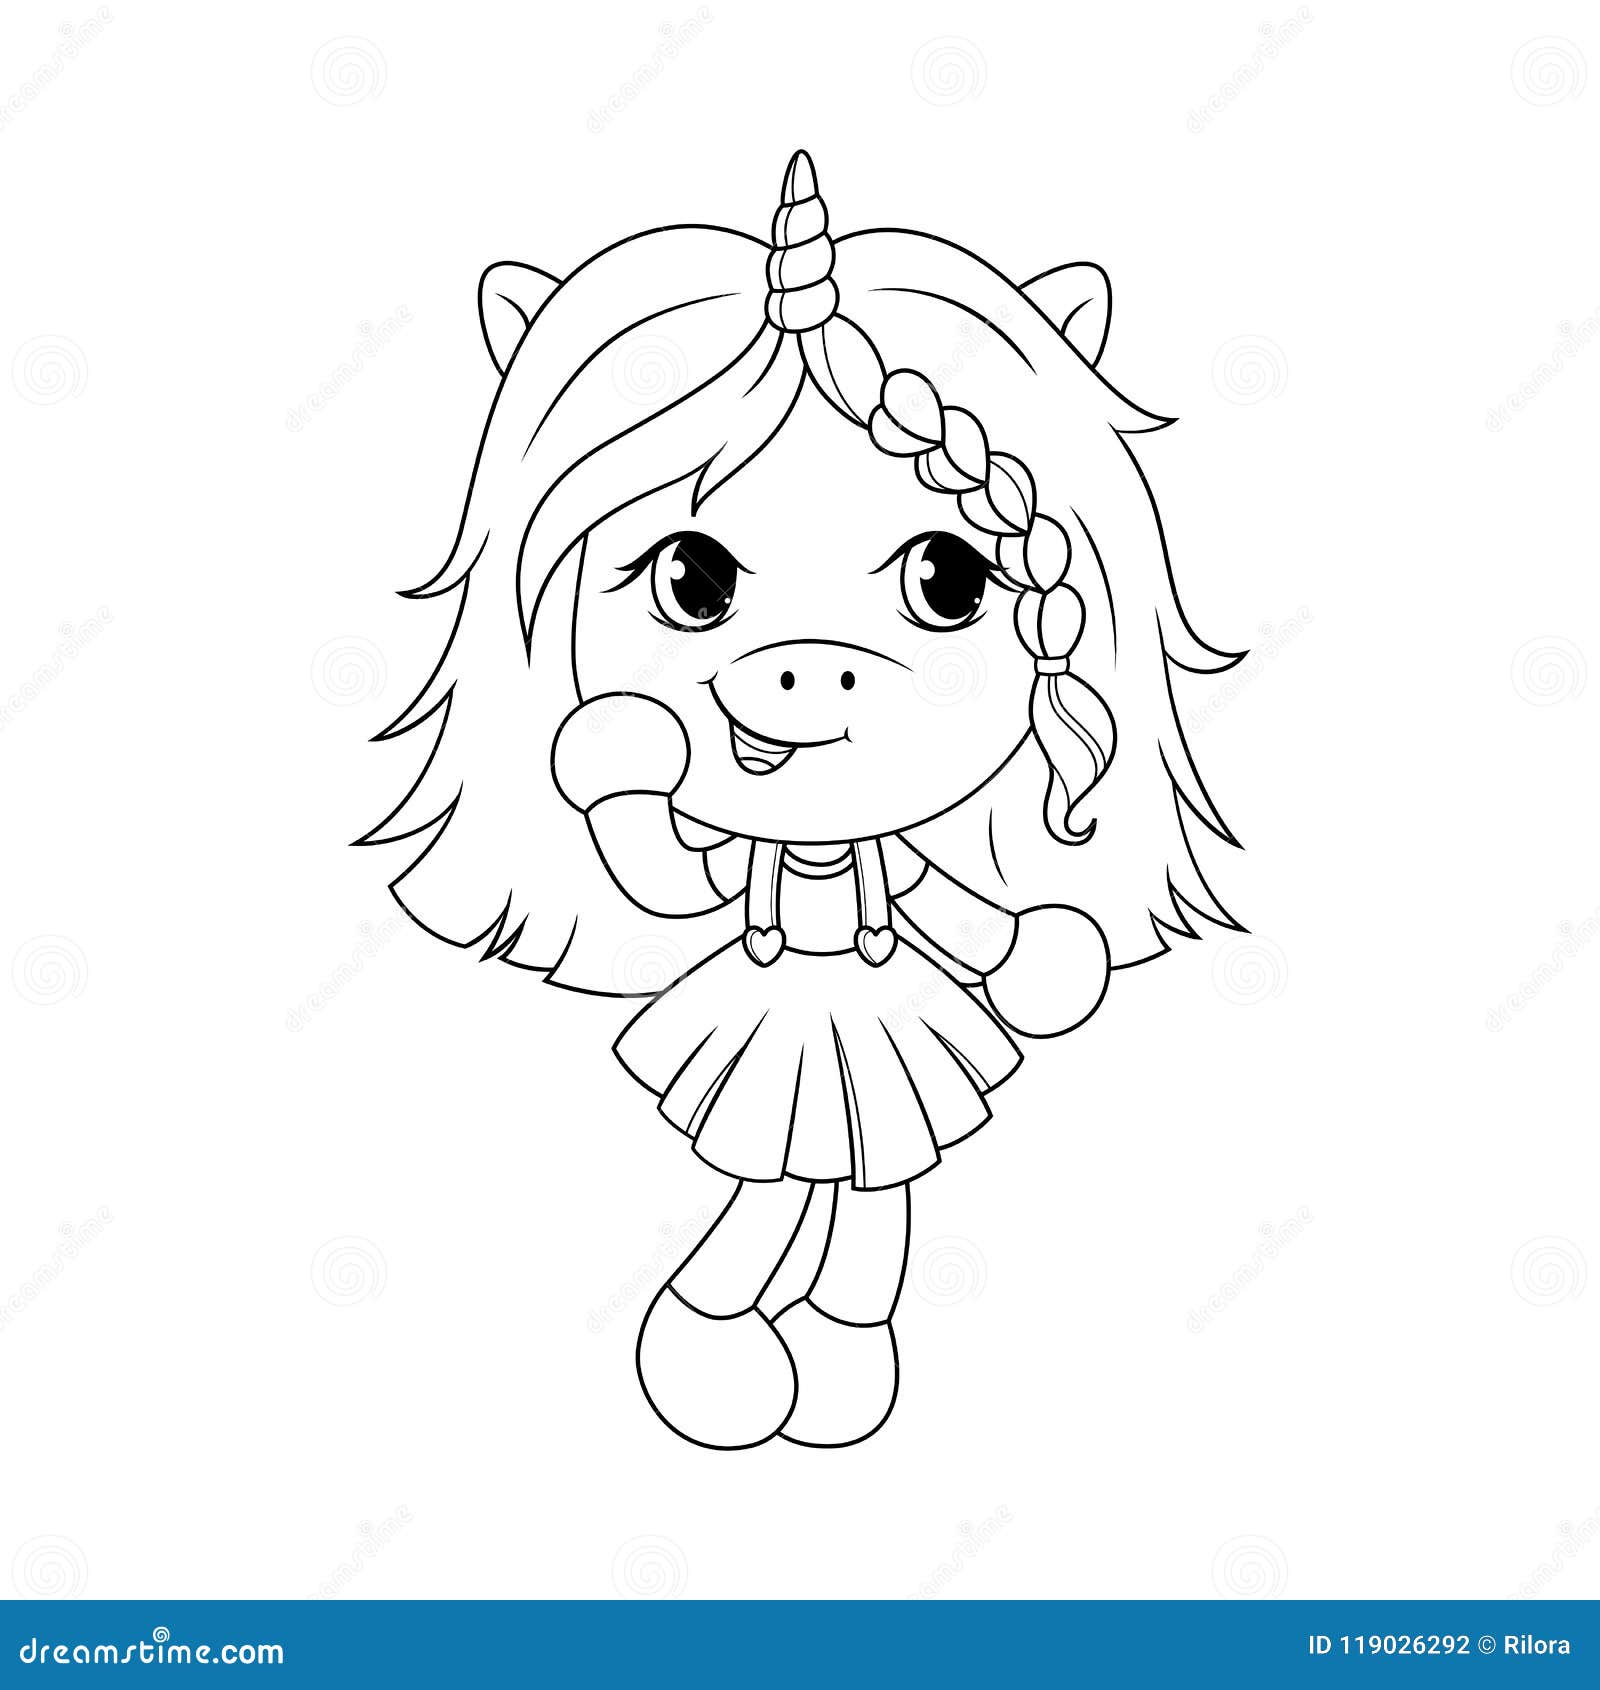 Adorable Unicorn Coloring Pages For Girls